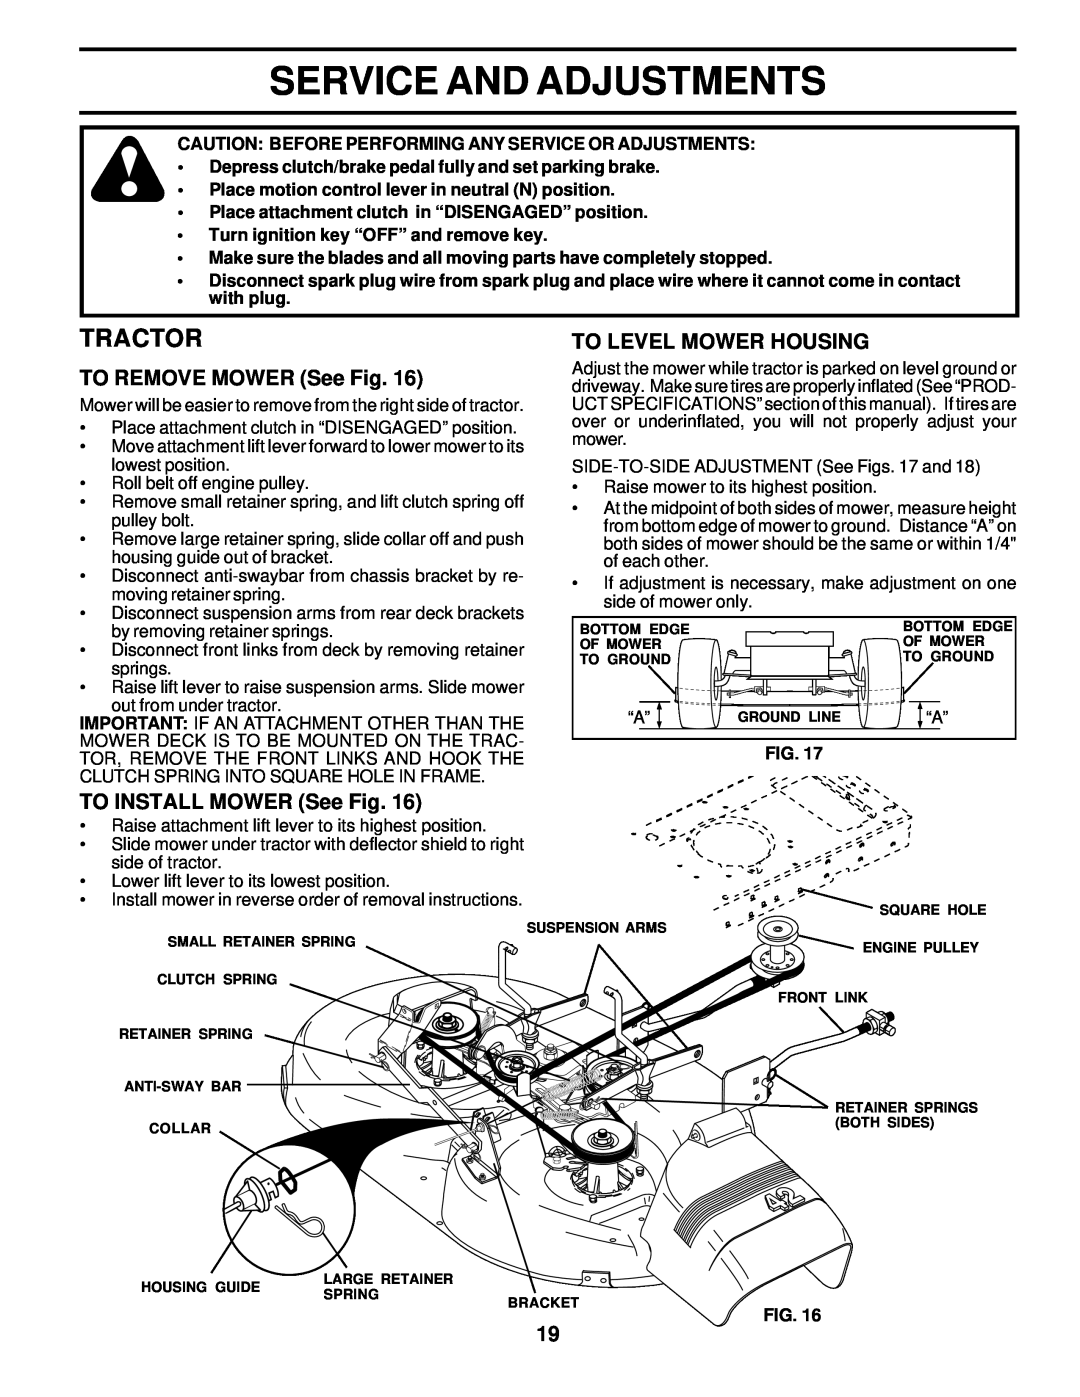 Weed Eater S165H42A Service And Adjustments, TO REMOVE MOWER See Fig, To Level Mower Housing, TO INSTALL MOWER See Fig 